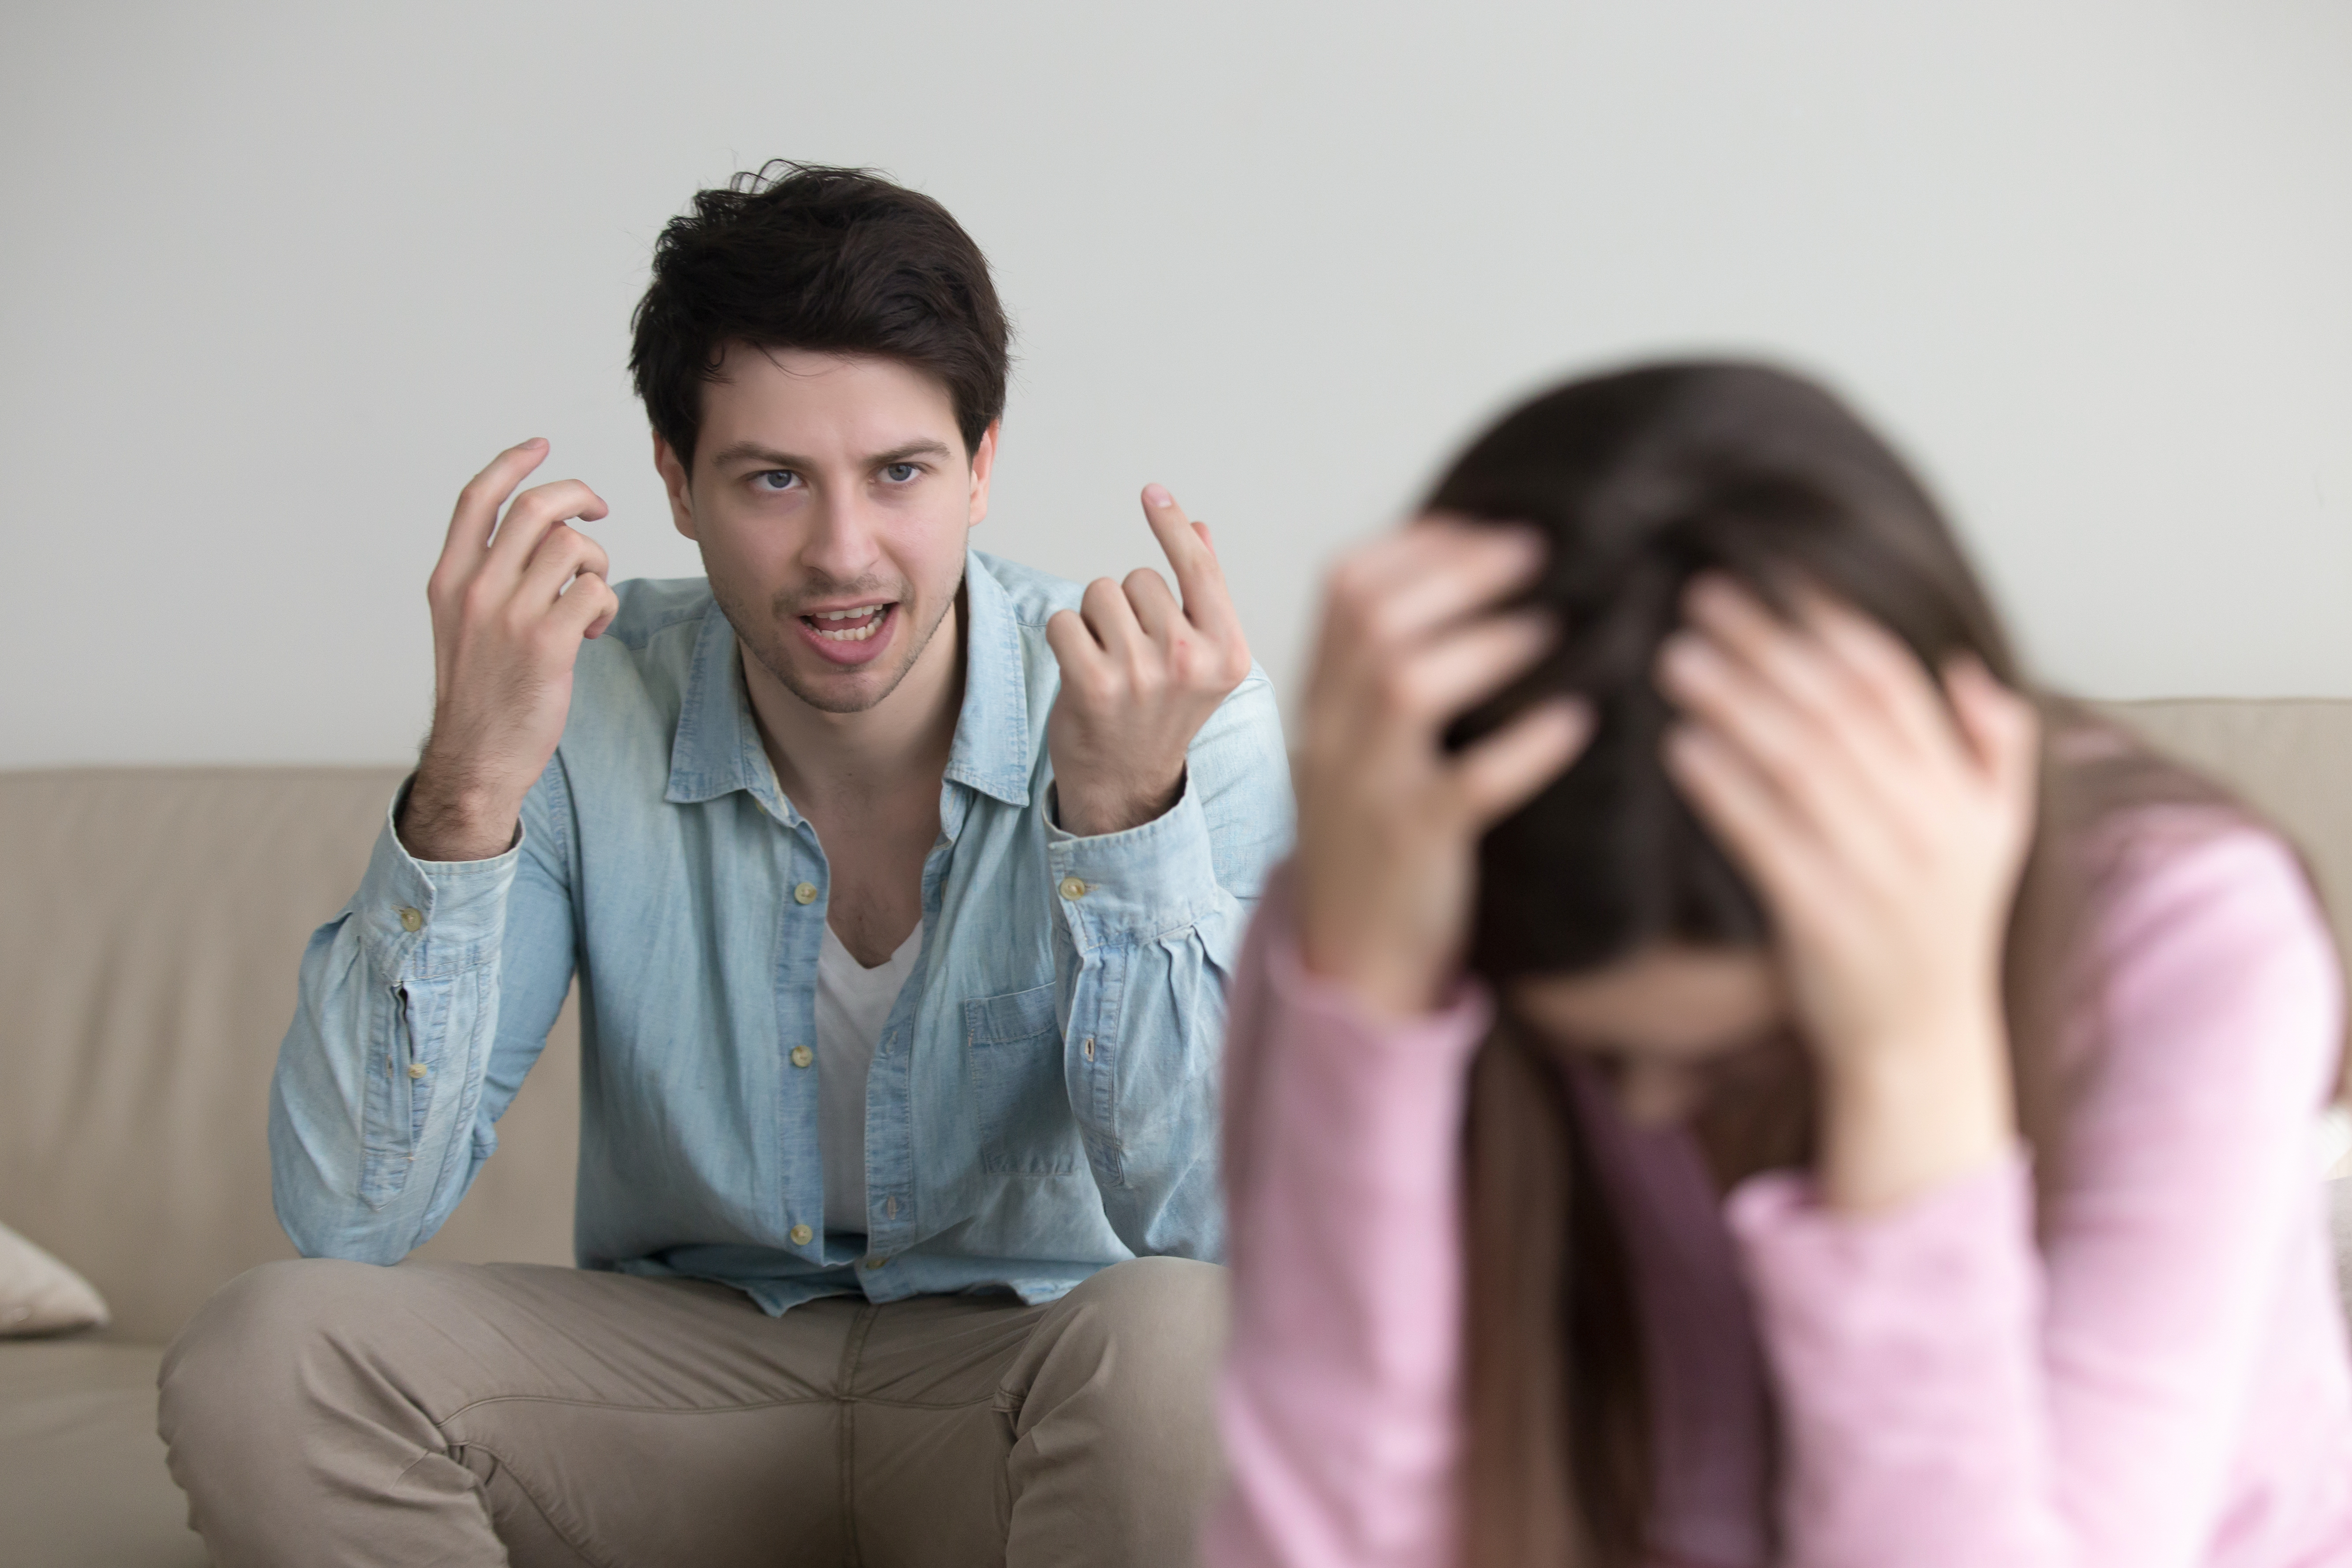 A man and woman arguing | Source: Shutterstock